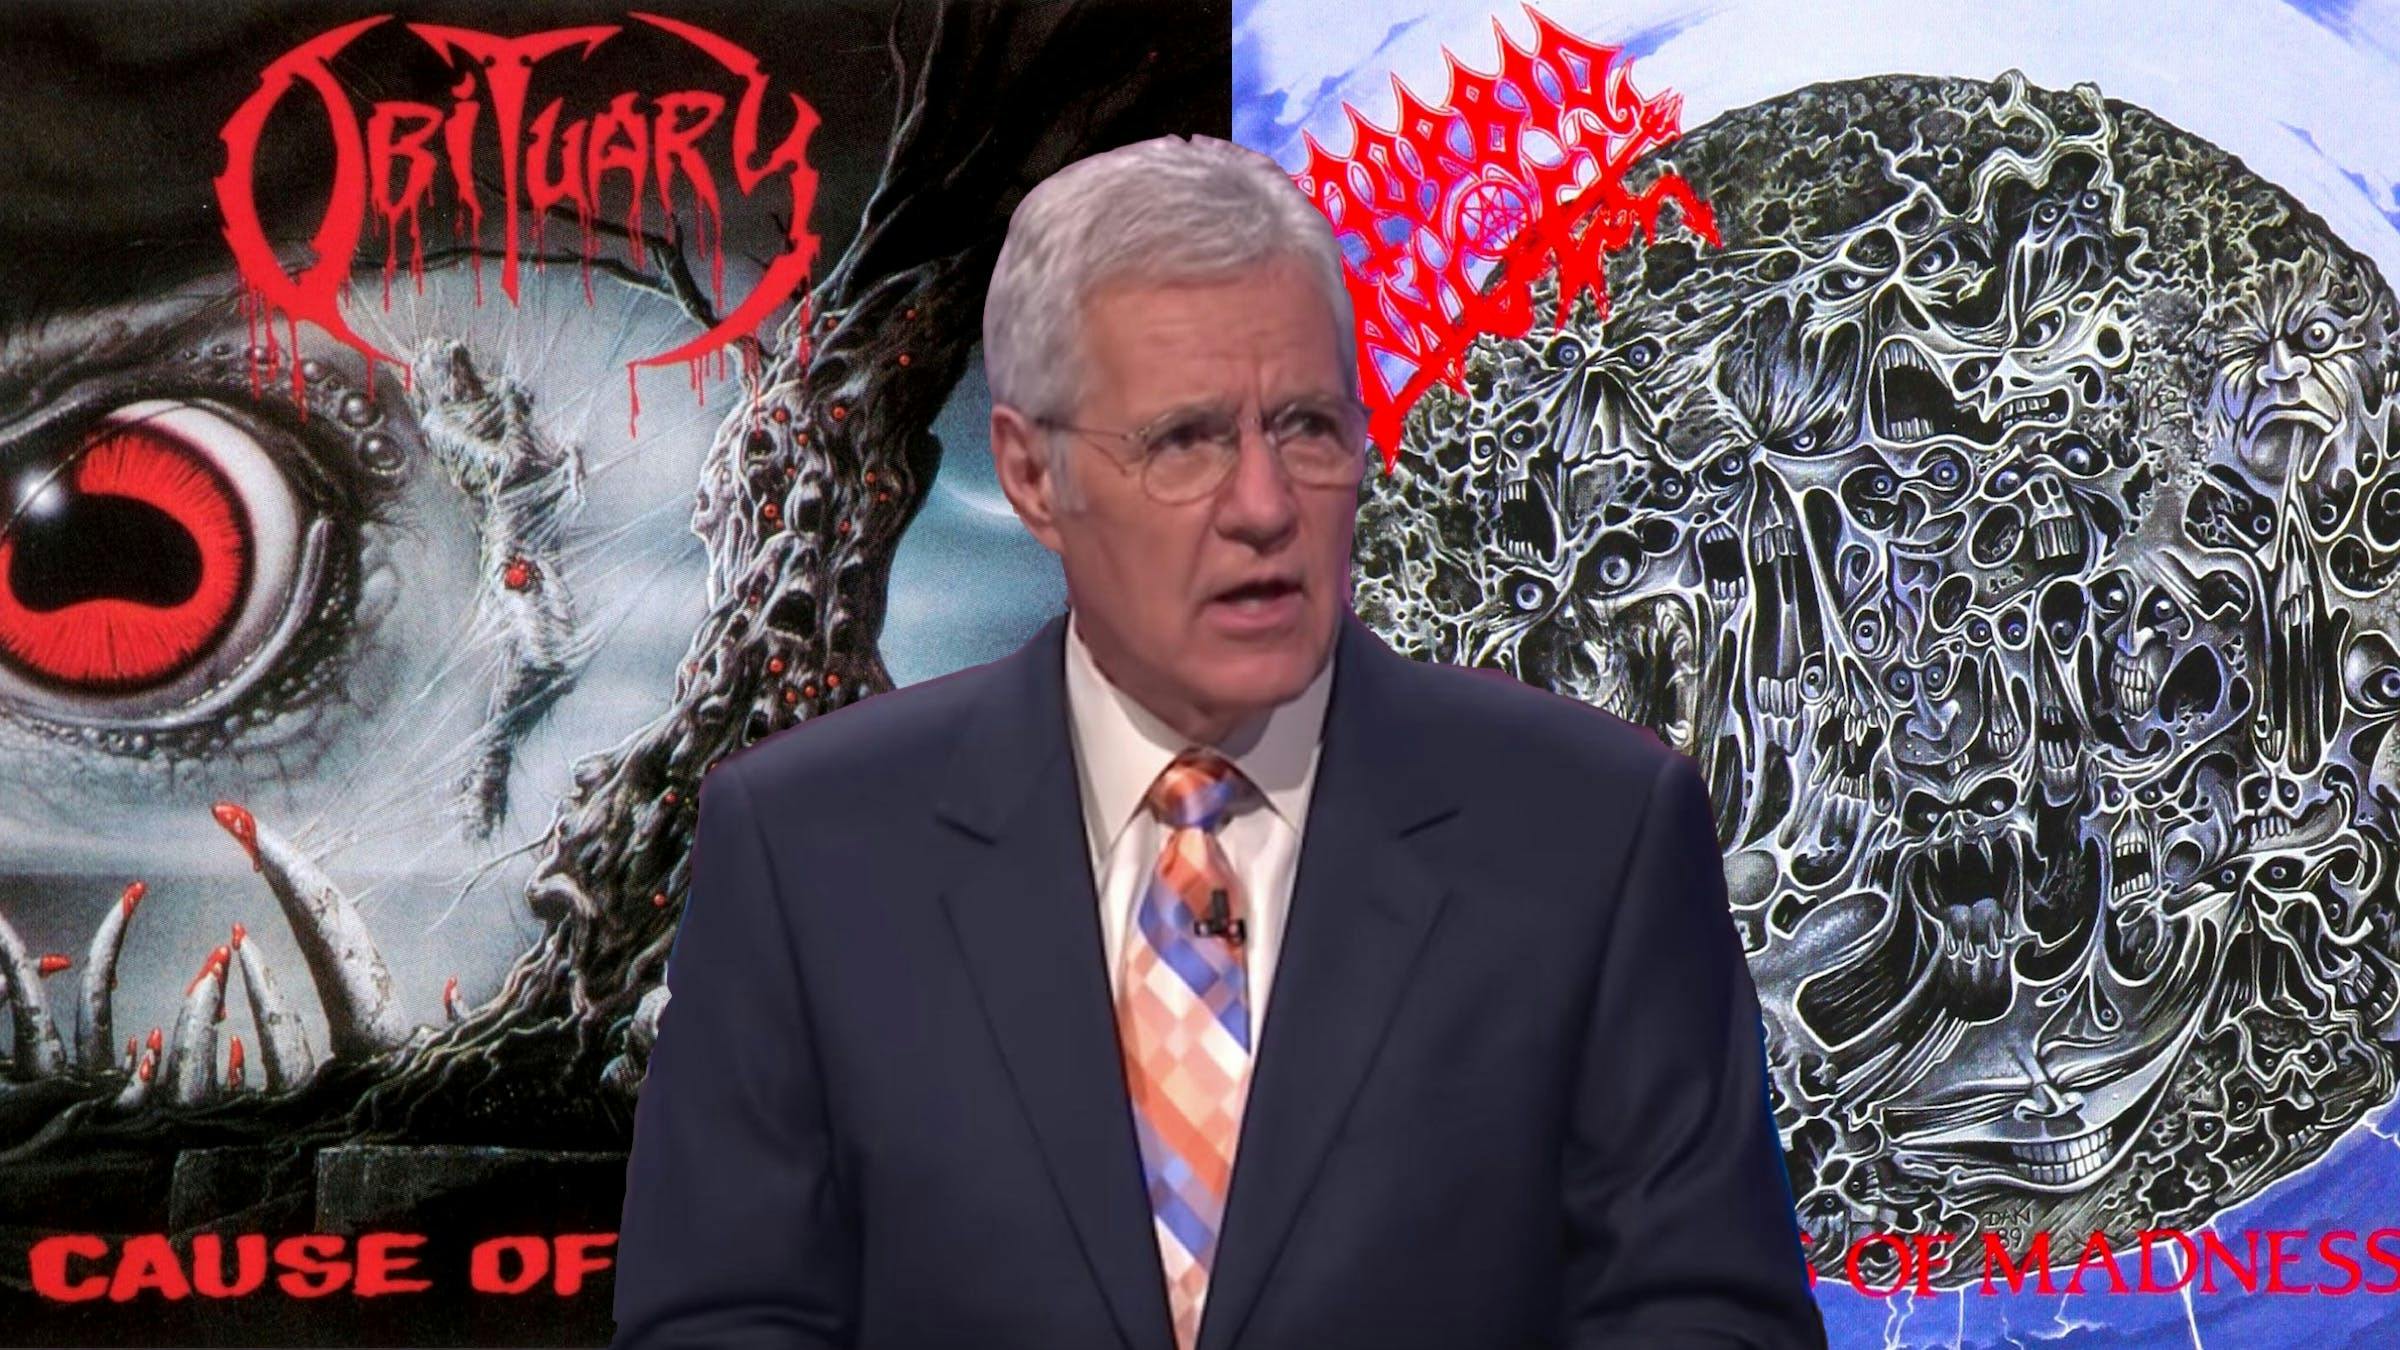 Morbid Angel And Obituary Were Featured As A Jeopardy! Question